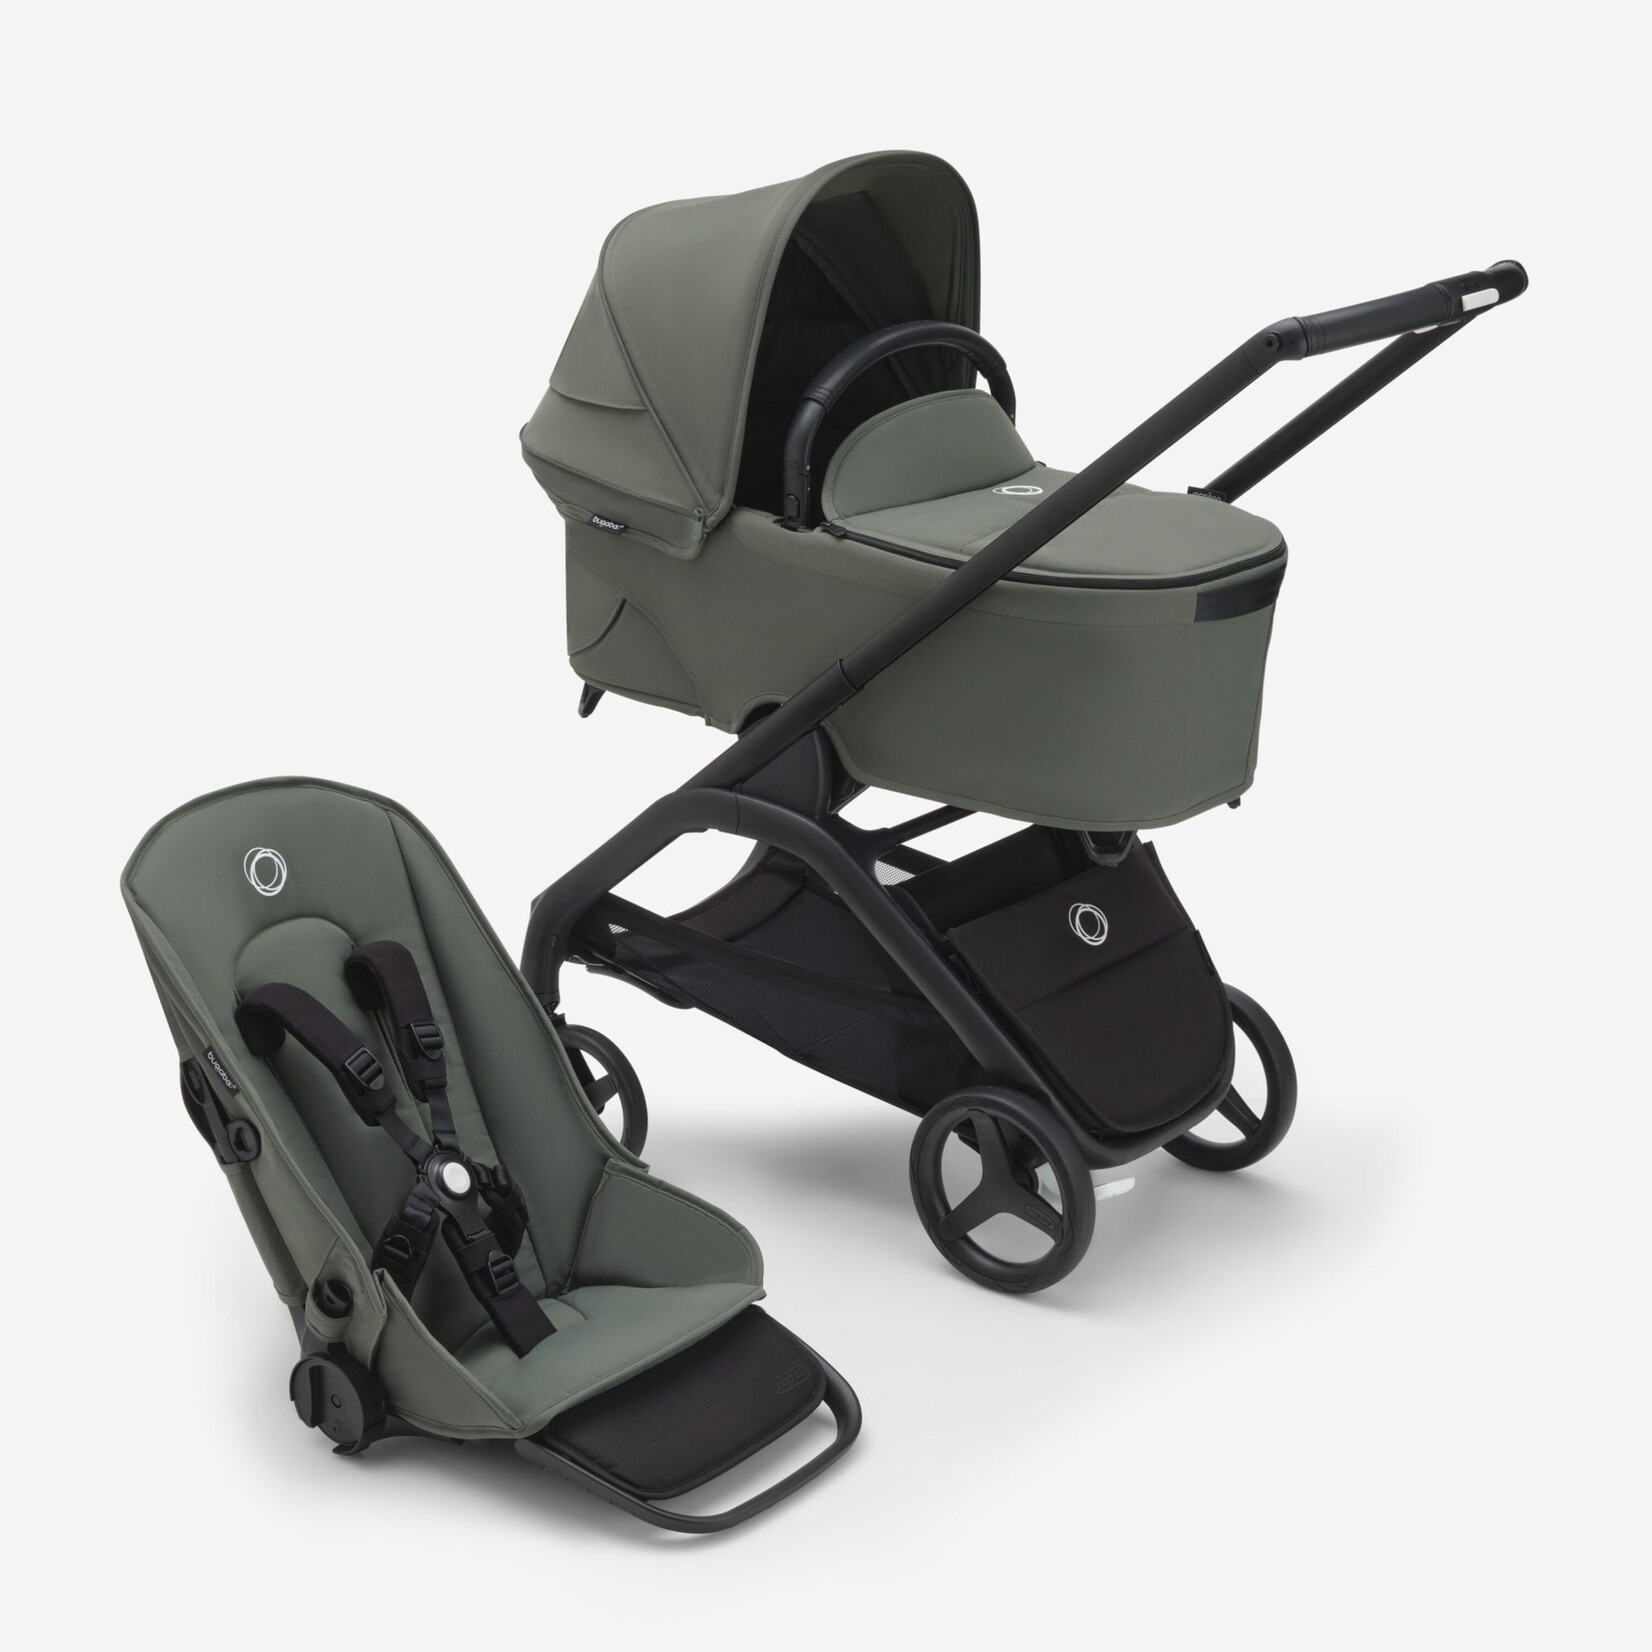 Bugaboo Dragonfly bassinet and seat pram- Forest green sun canopy, forest green fabrics, black chassis